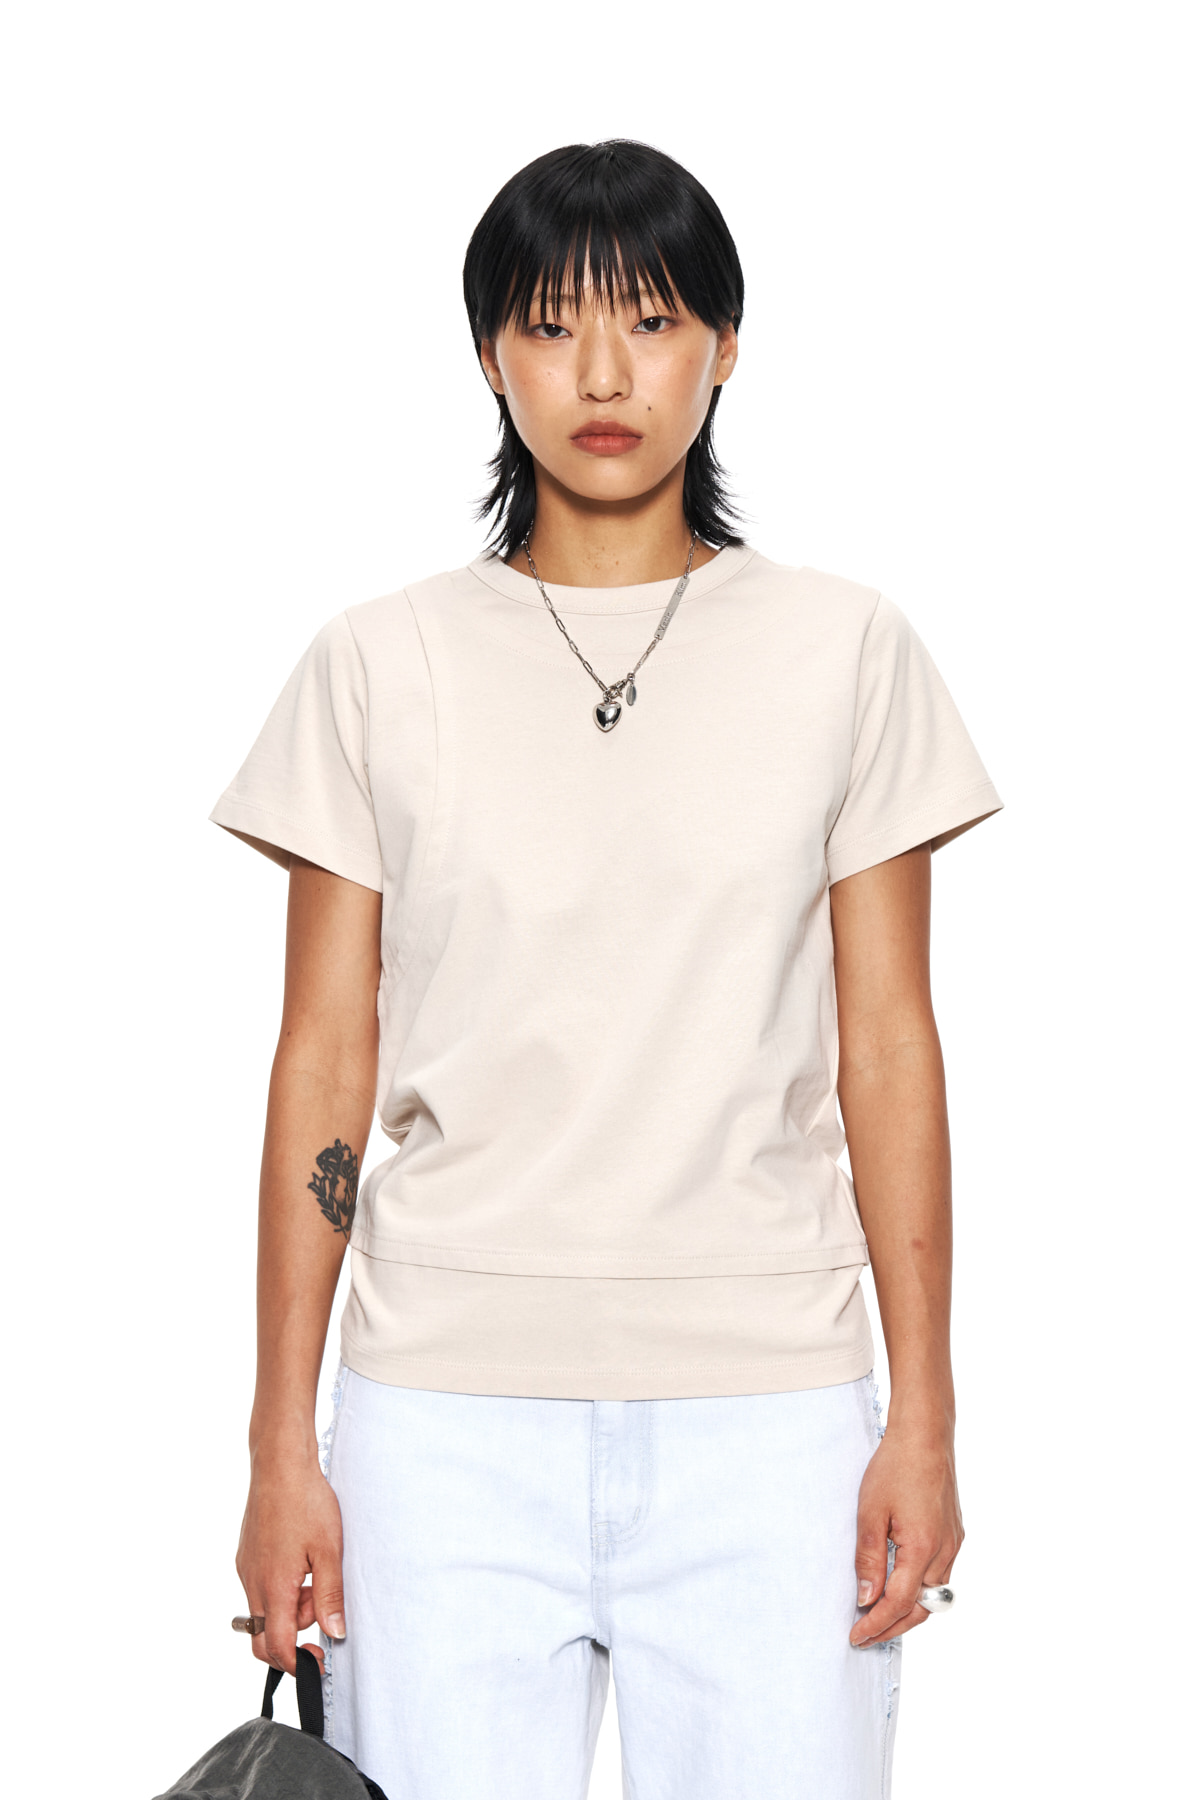 LAYERED DETAIL TOP IN PALE BEIGE